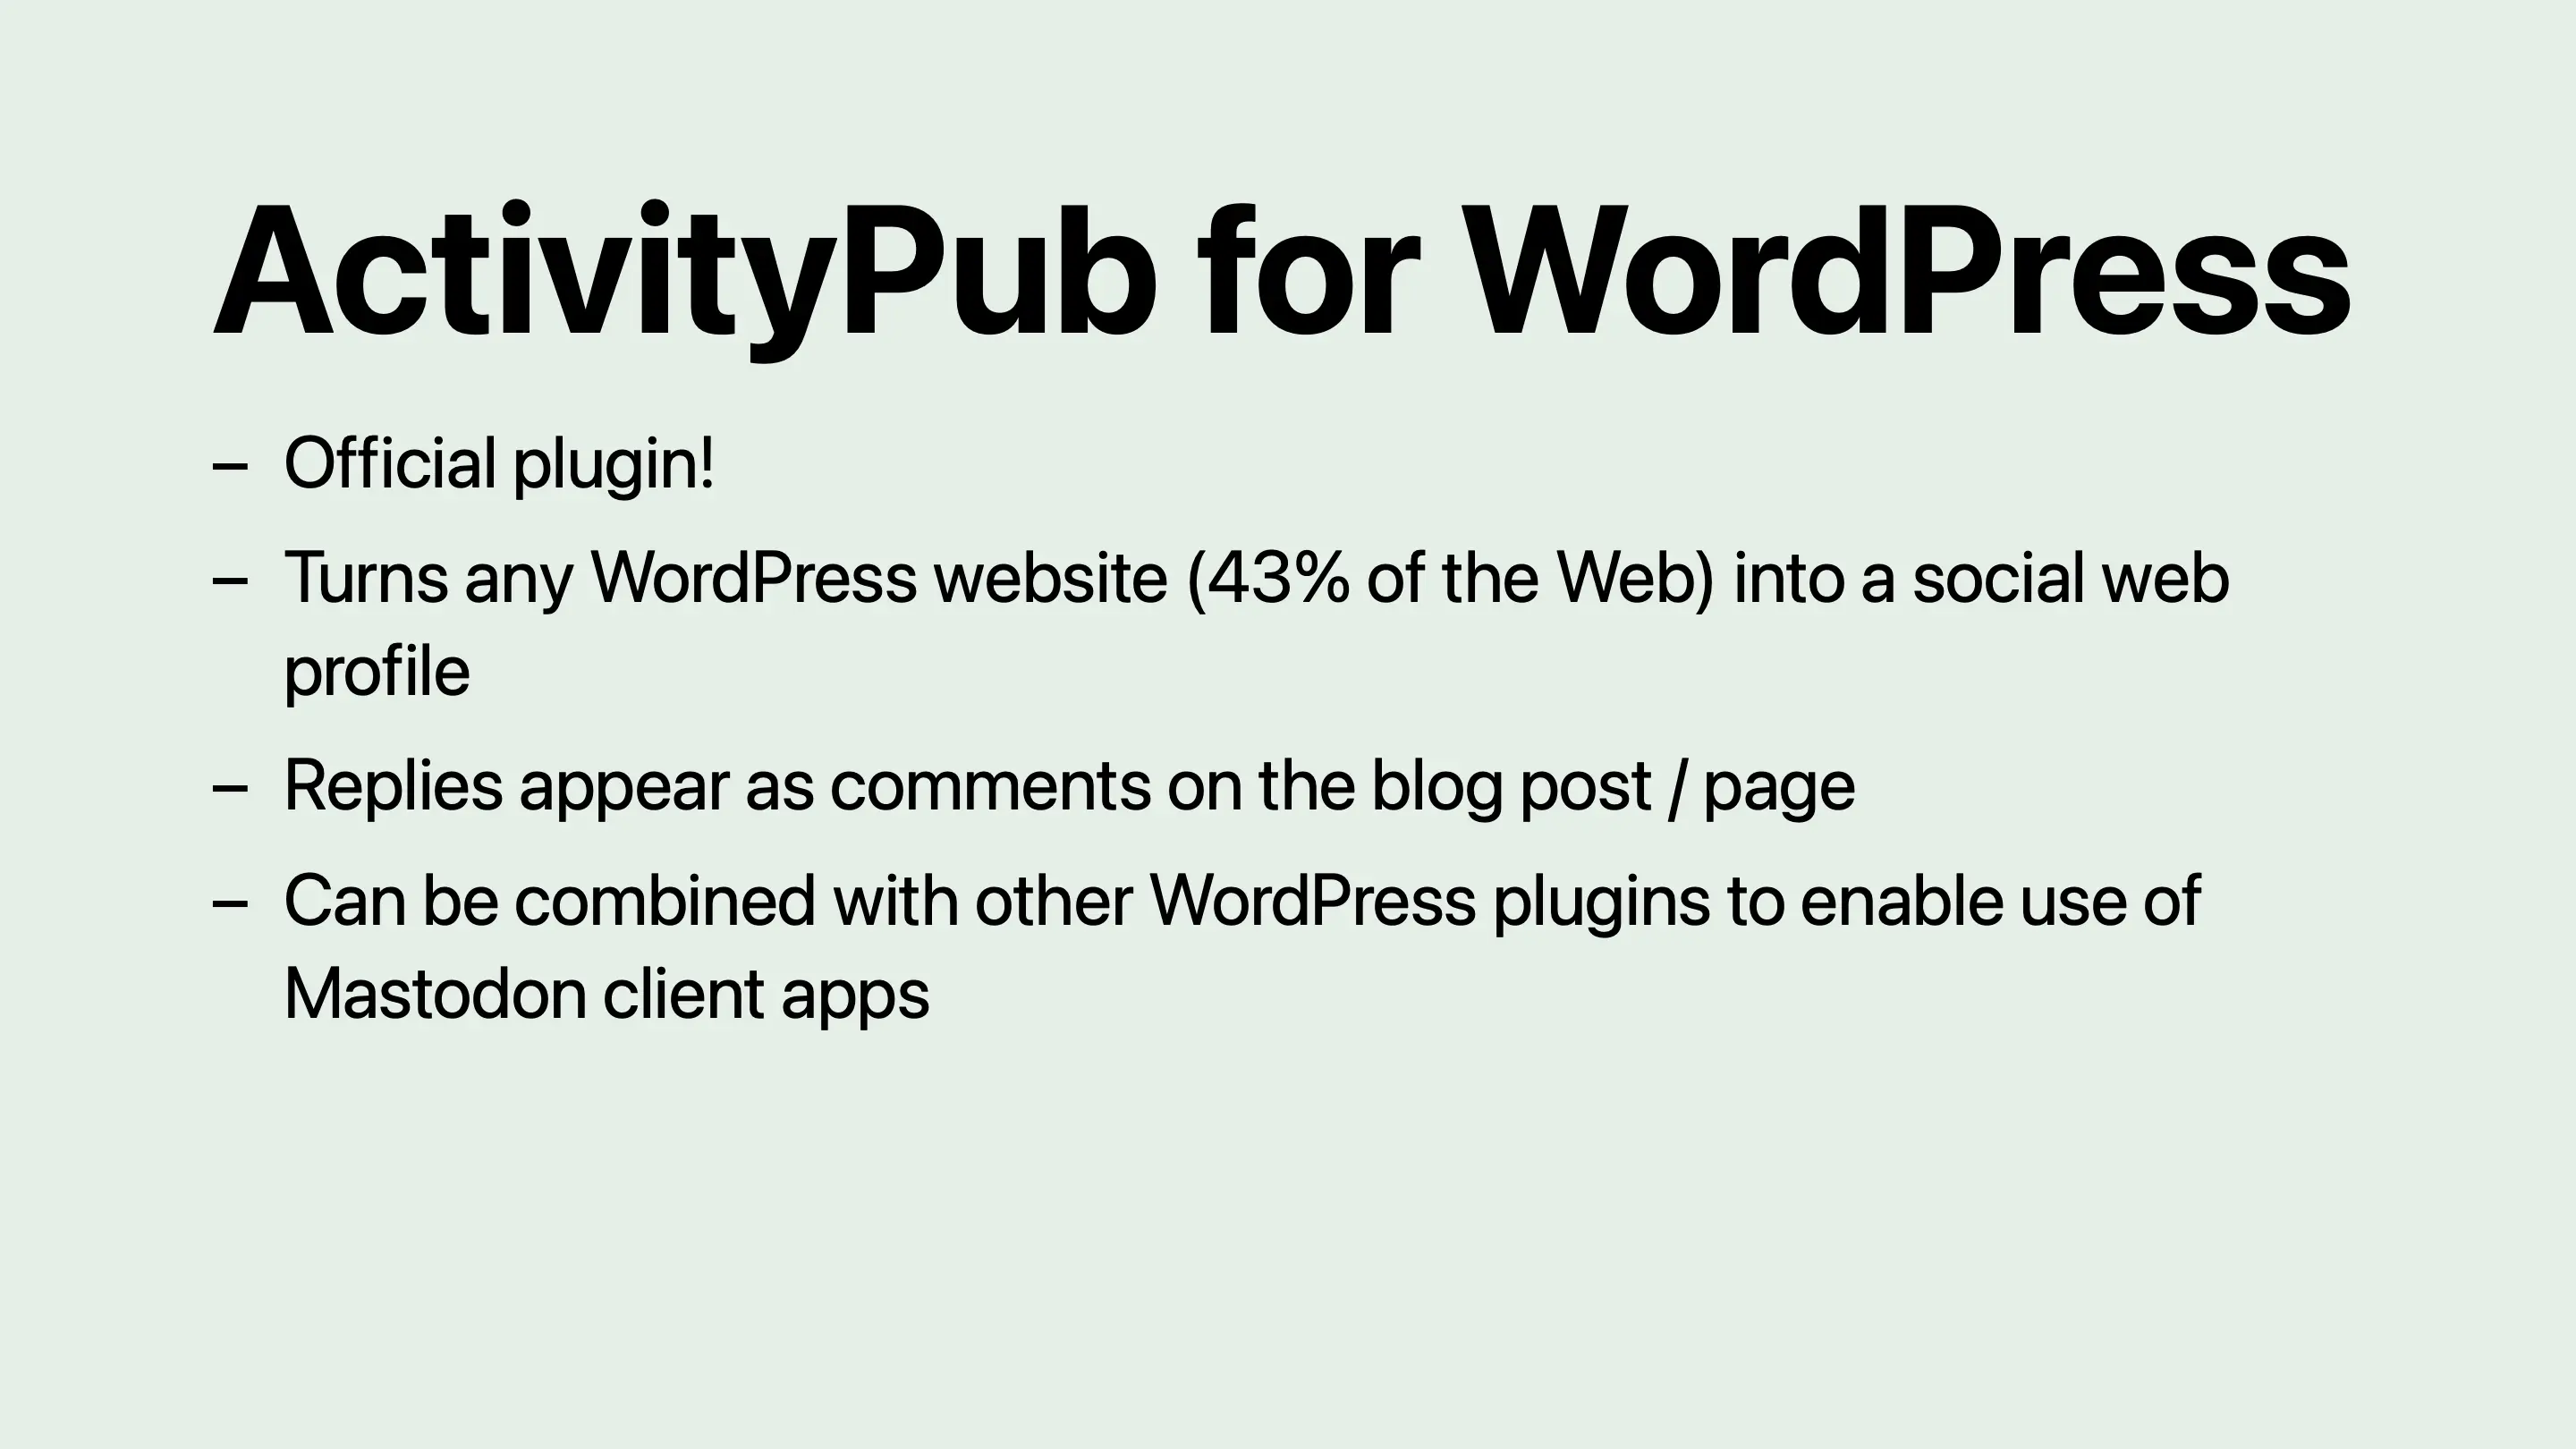 ActivityPub for WordPress: Official plugin! Turns any WordPress website (43% of the Web) into a social web profile. Replies appear as comments on the blog post or page. Can be combined with other WordPress plugins to enable use of Mastodon client apps.